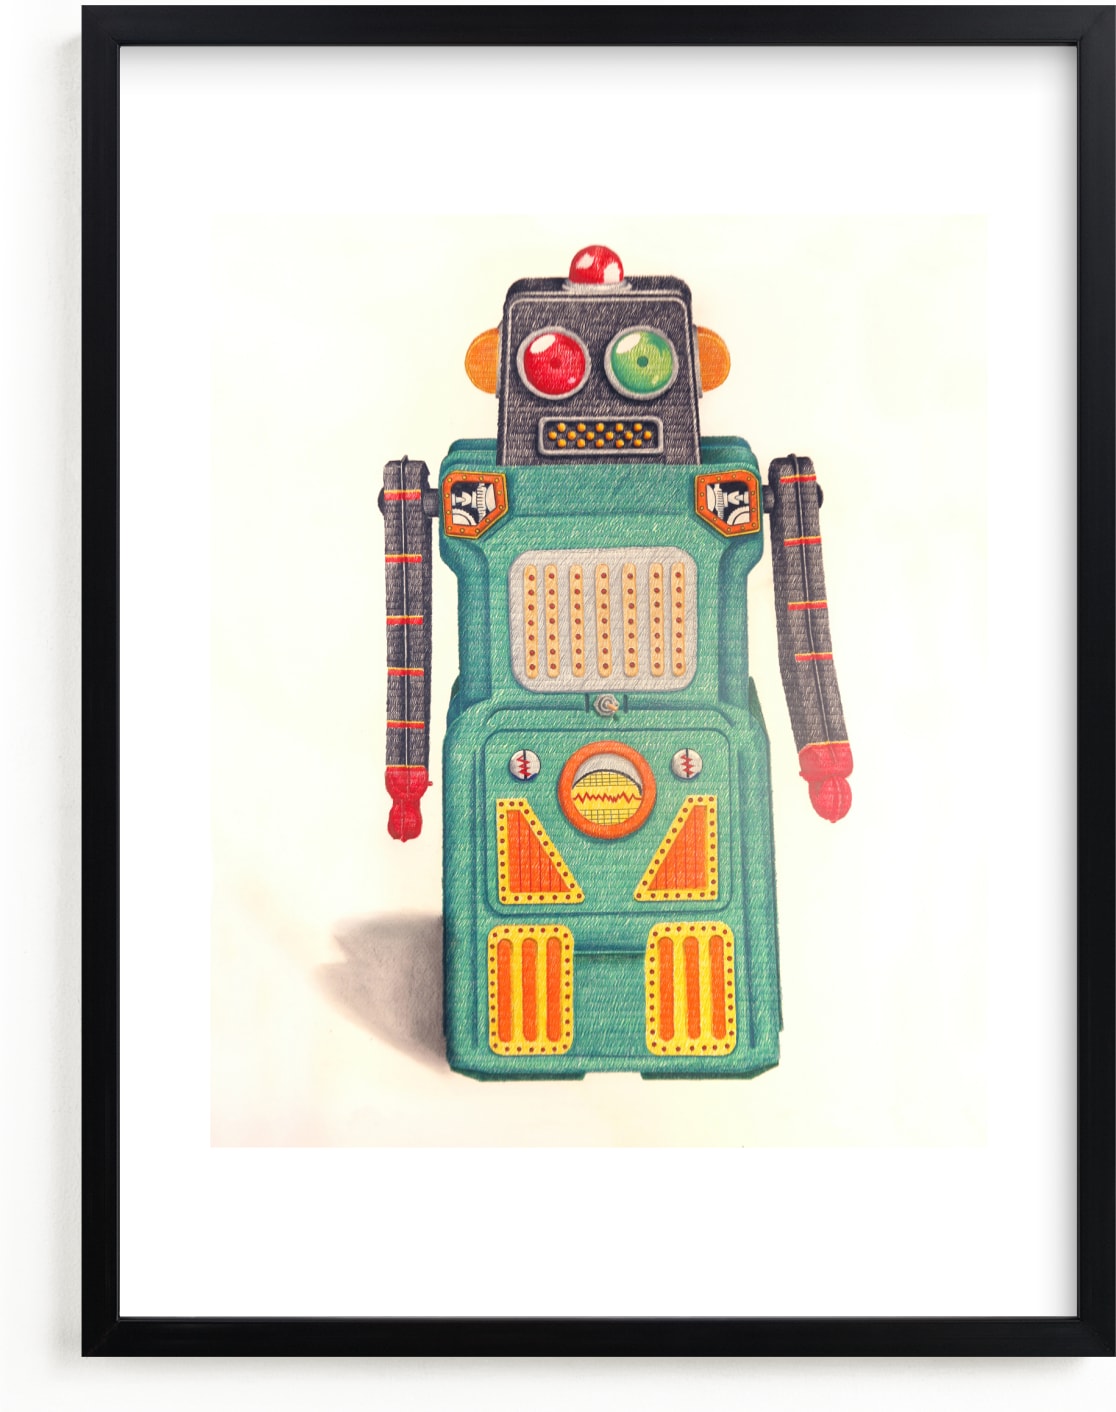 This is a green kids wall art by Ed Hogan called Robot Green.